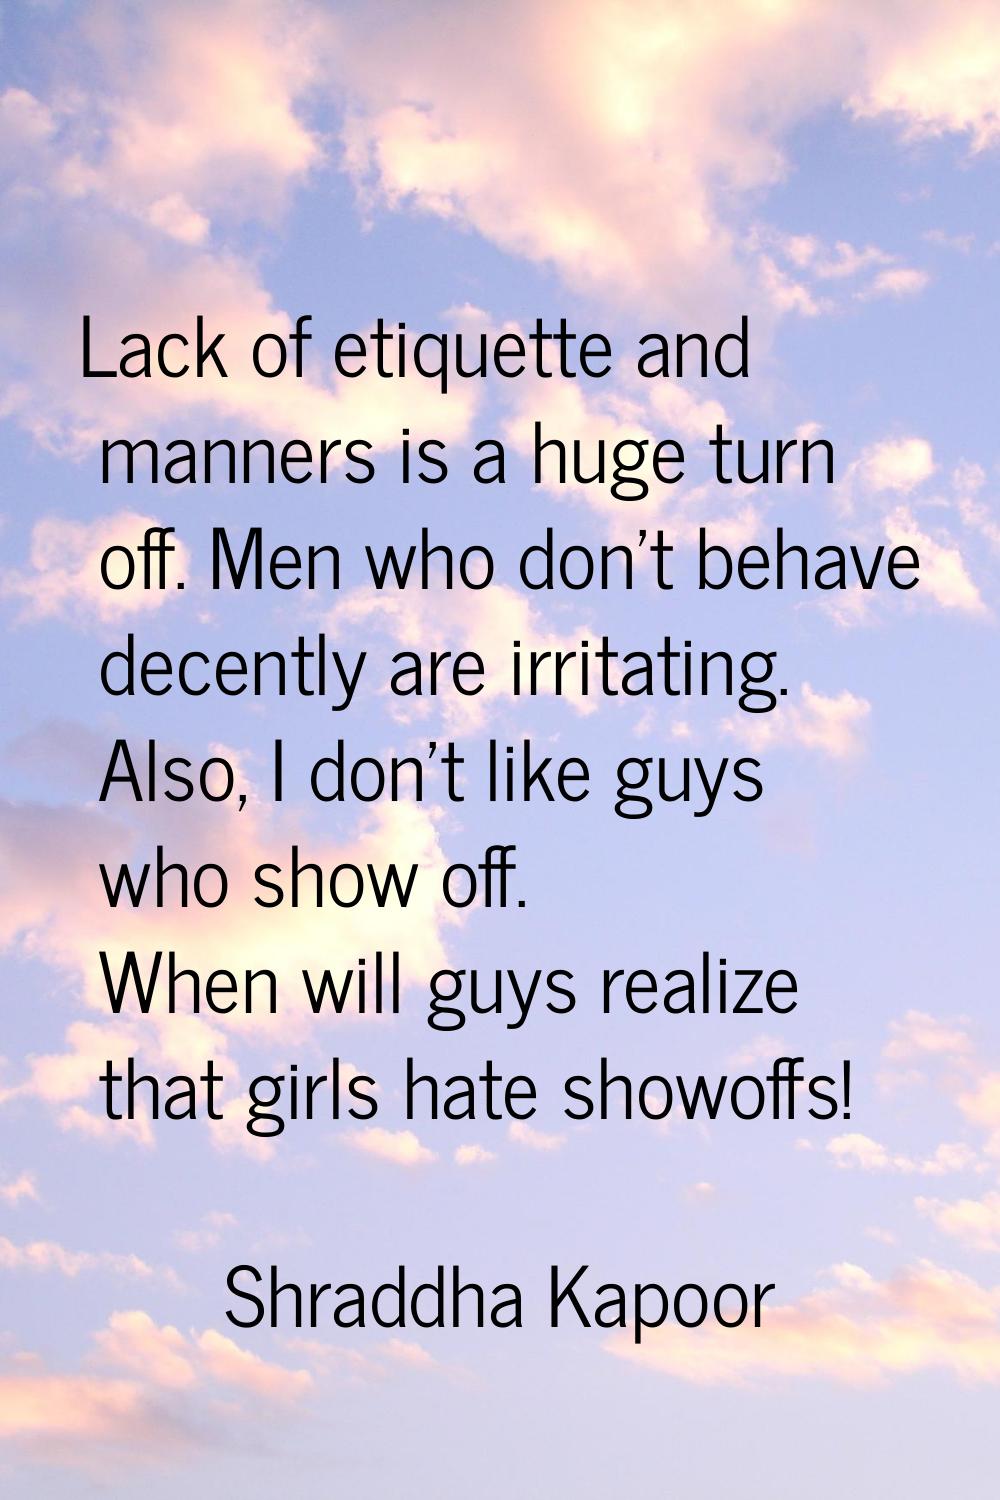 Lack of etiquette and manners is a huge turn off. Men who don't behave decently are irritating. Als